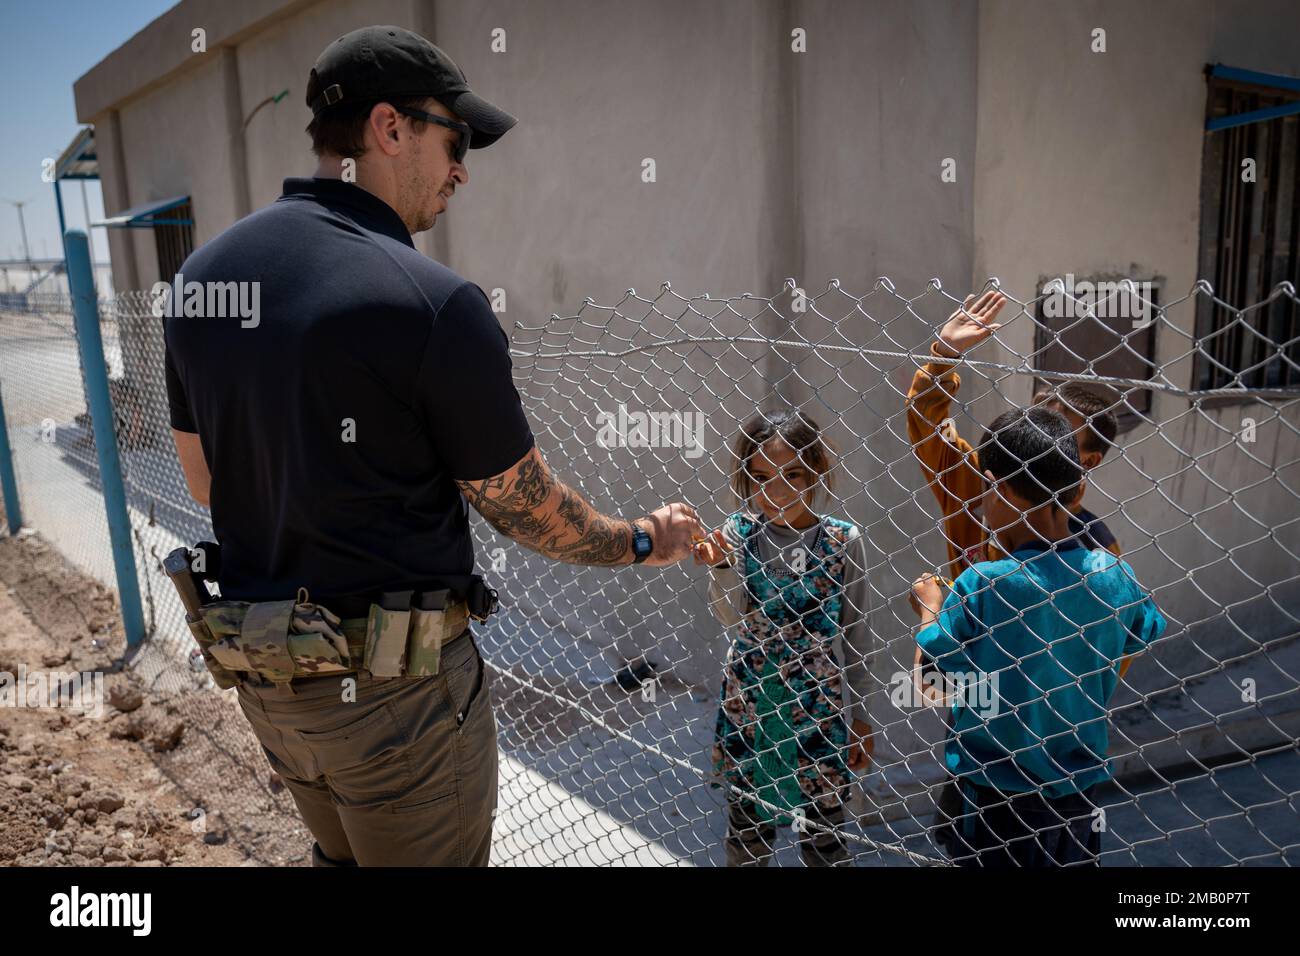 Syria – A member of a Combined Special Operations Joint Task Force – Levant’s Civil Affairs Team, passes out candy to children during a visit to the internally displaced persons camp near Areesha in the Hasakah region of Syria, June 9, 2022. Stock Photo